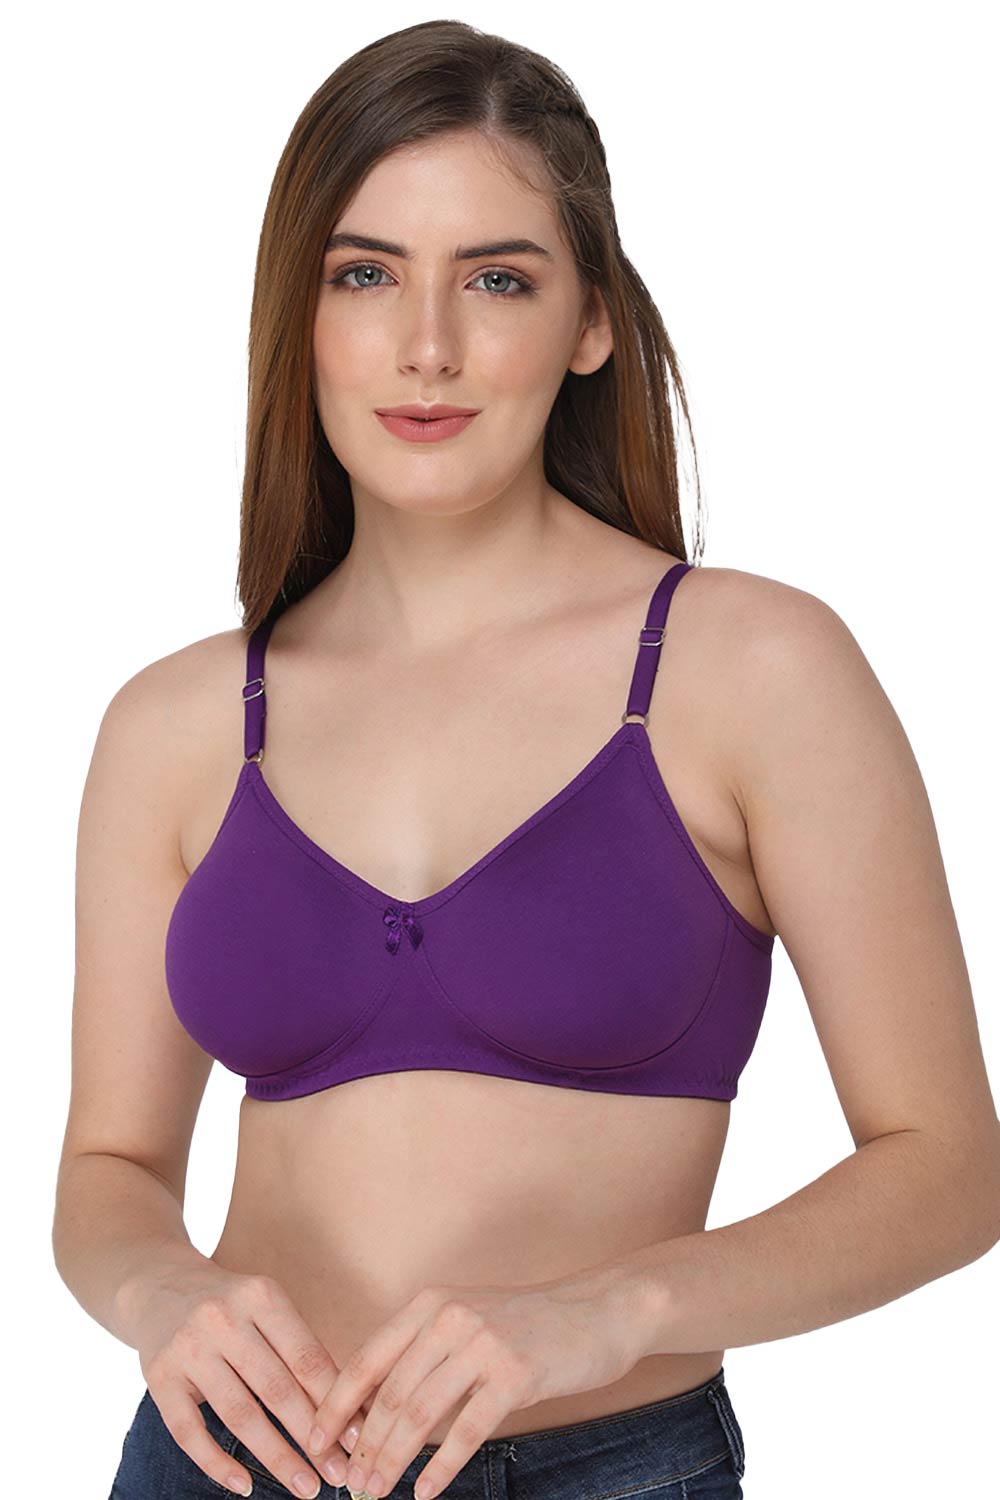 Intimacy Saree Bra Special Combo Pack - IN29 - C34